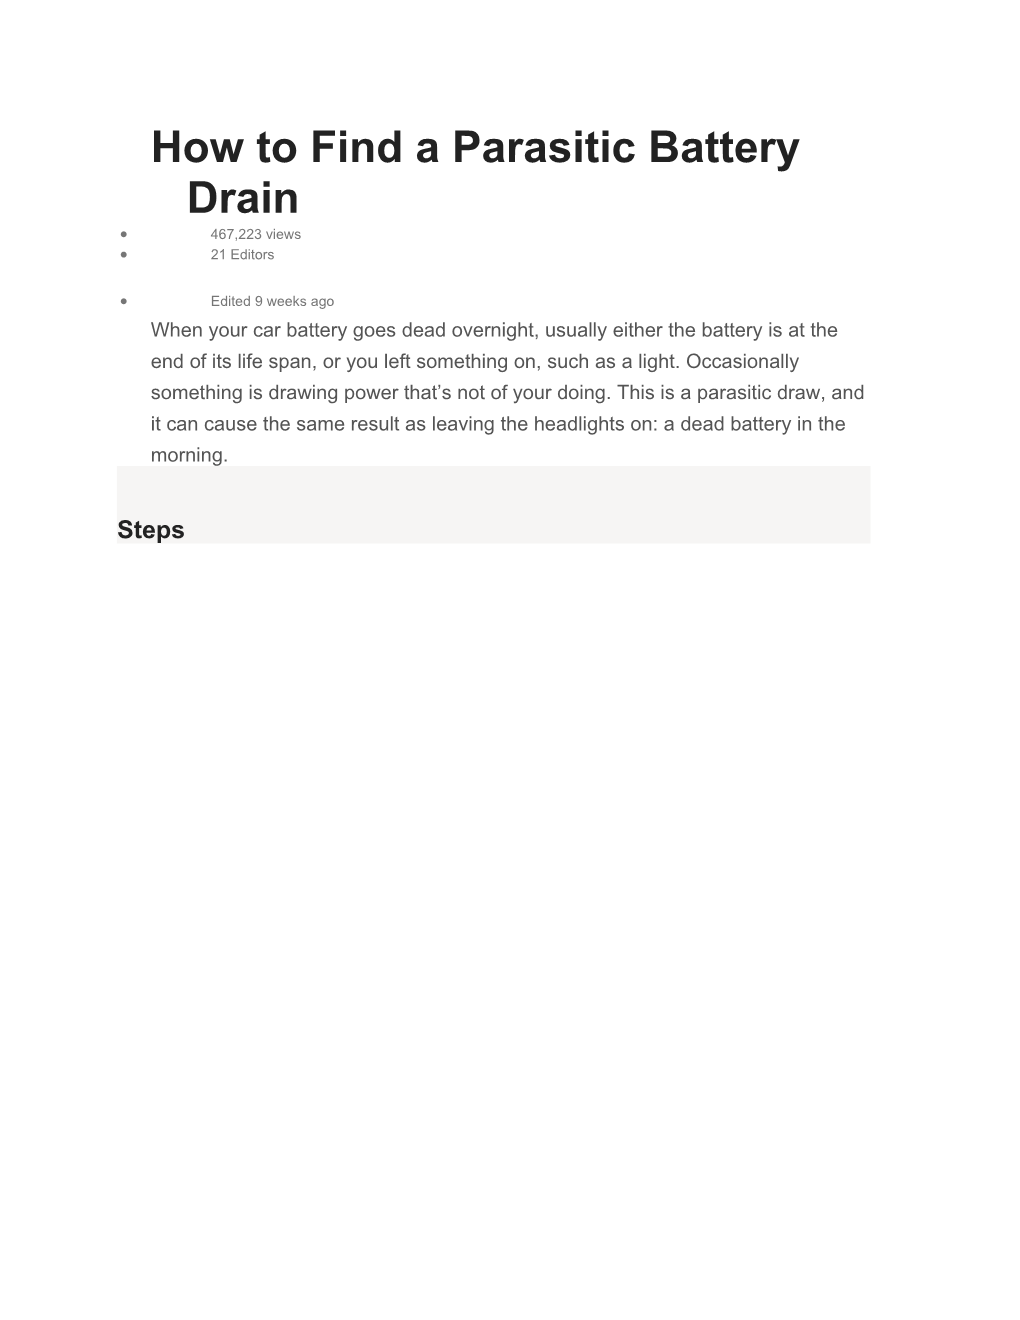 How to Find a Parasitic Battery Drain s1